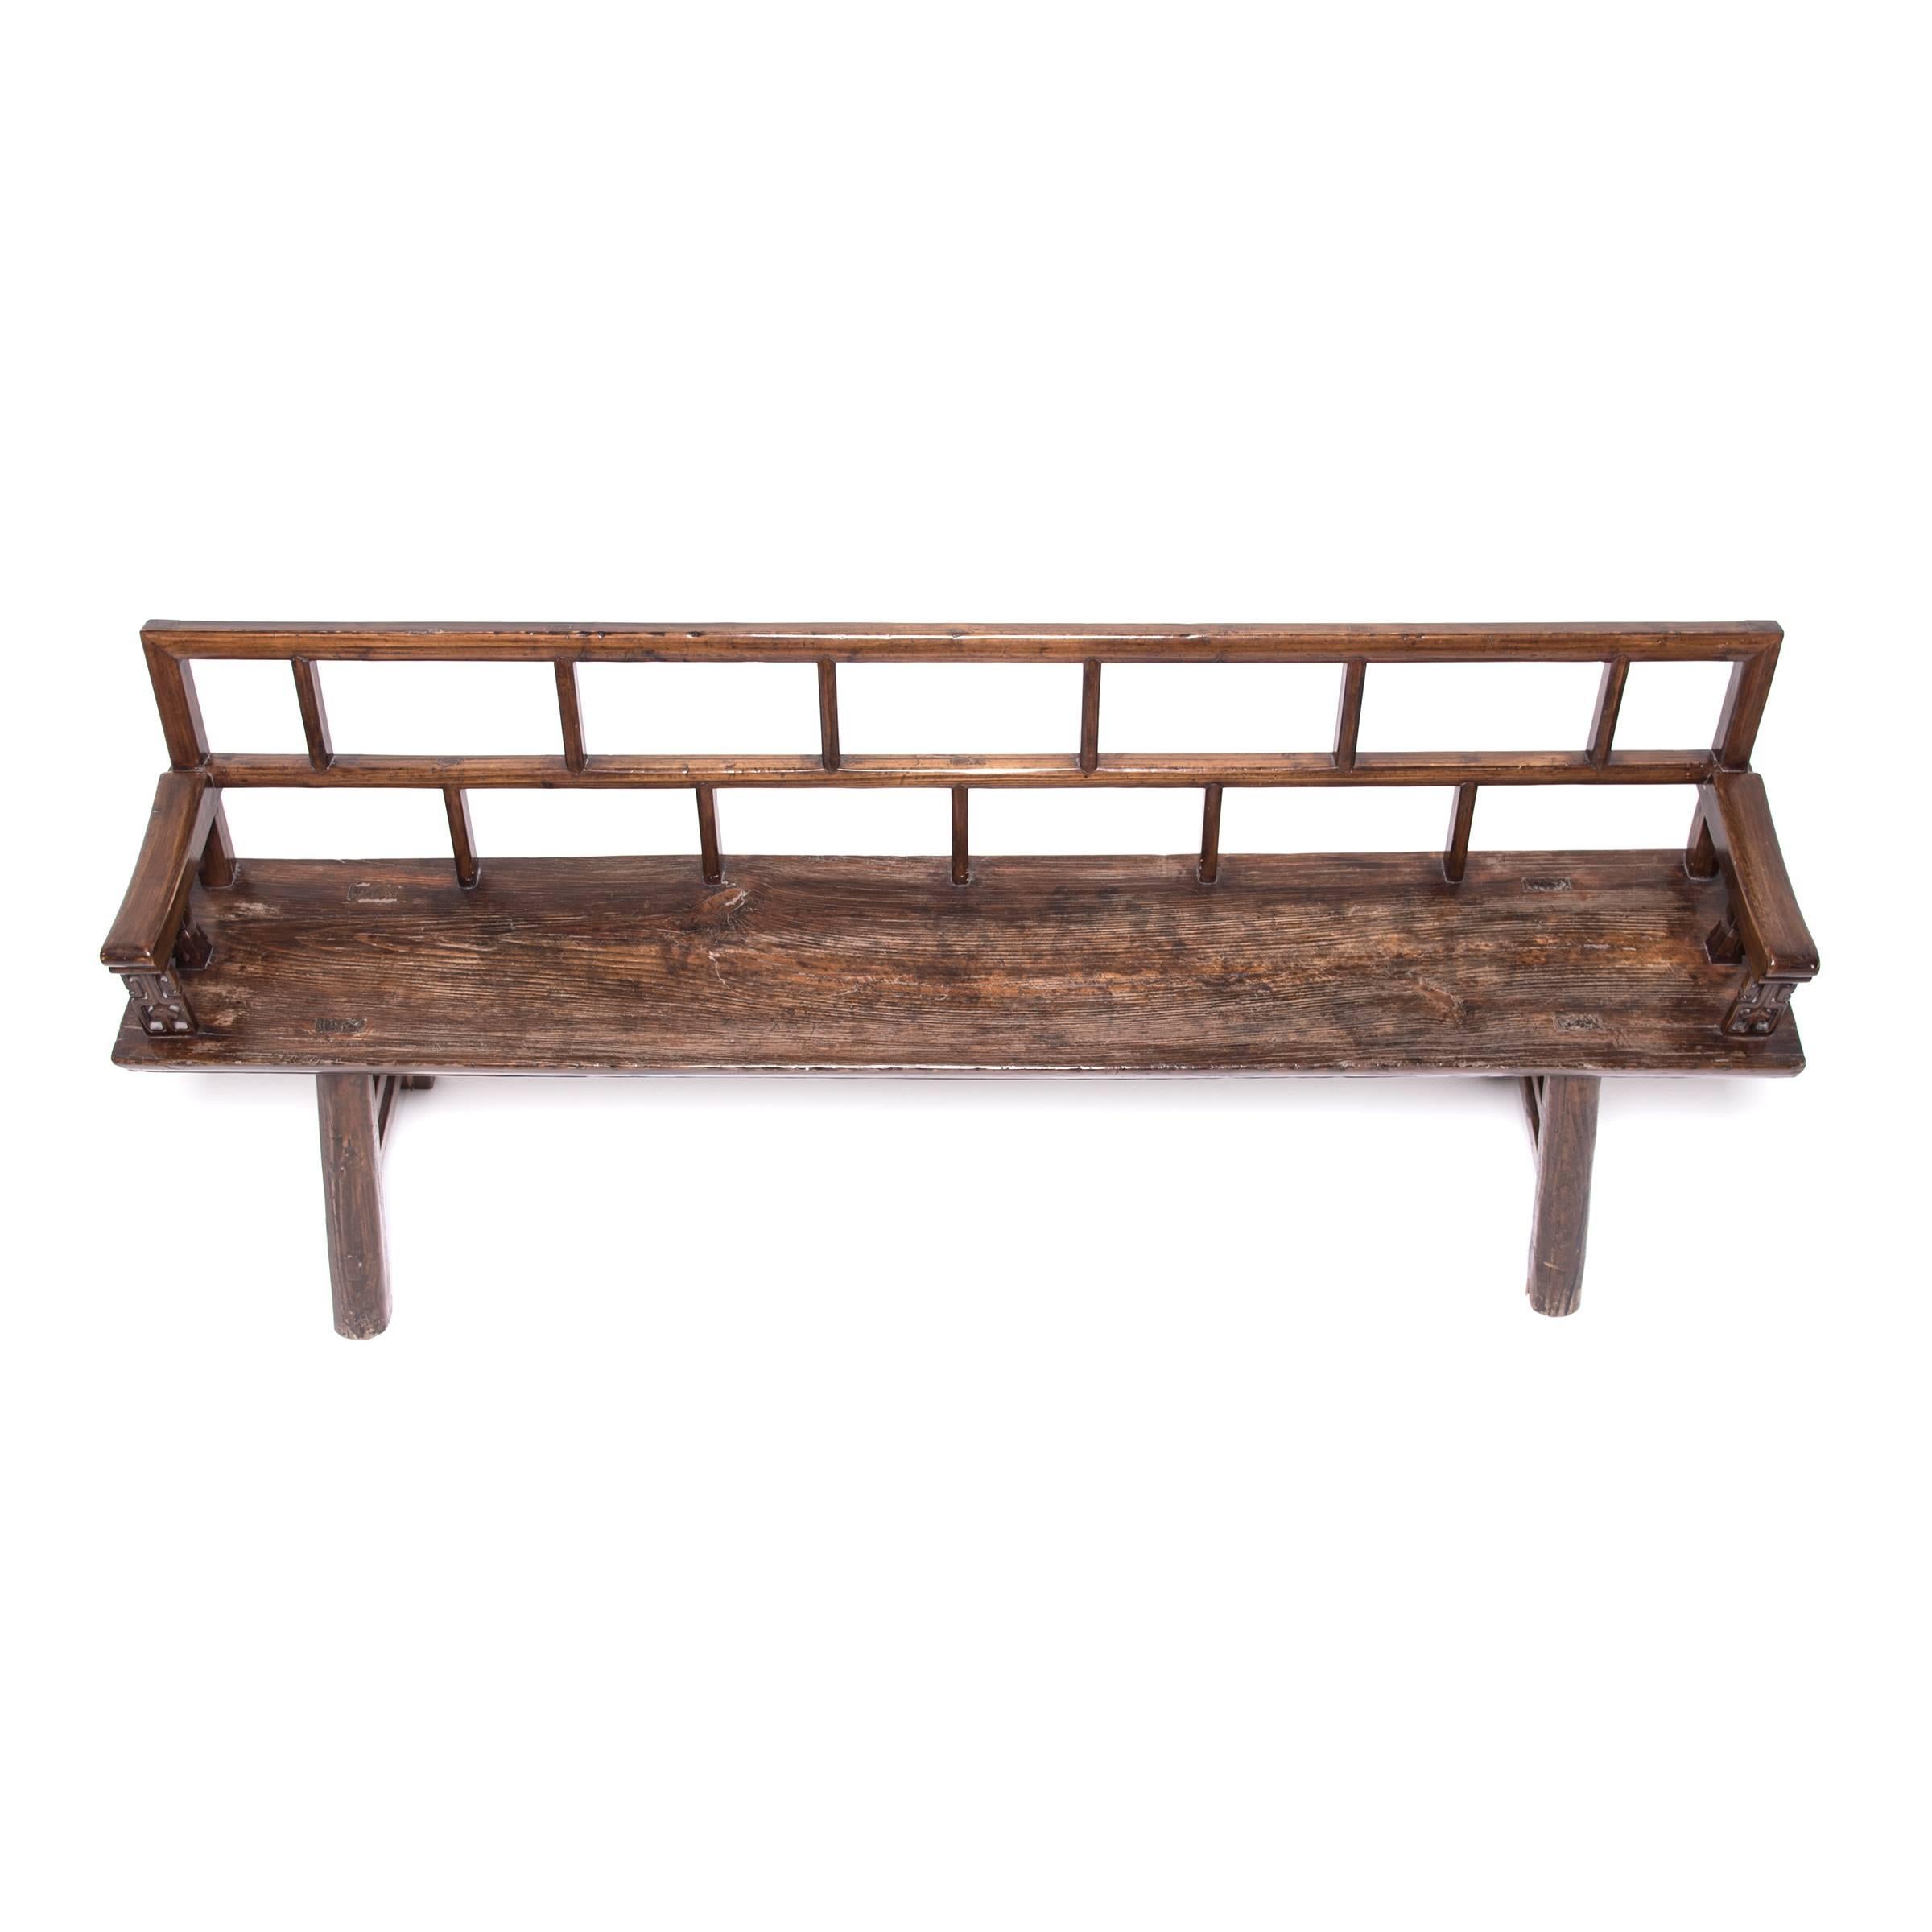 Hand-Carved Chinese Staggered Ladder Back Bench